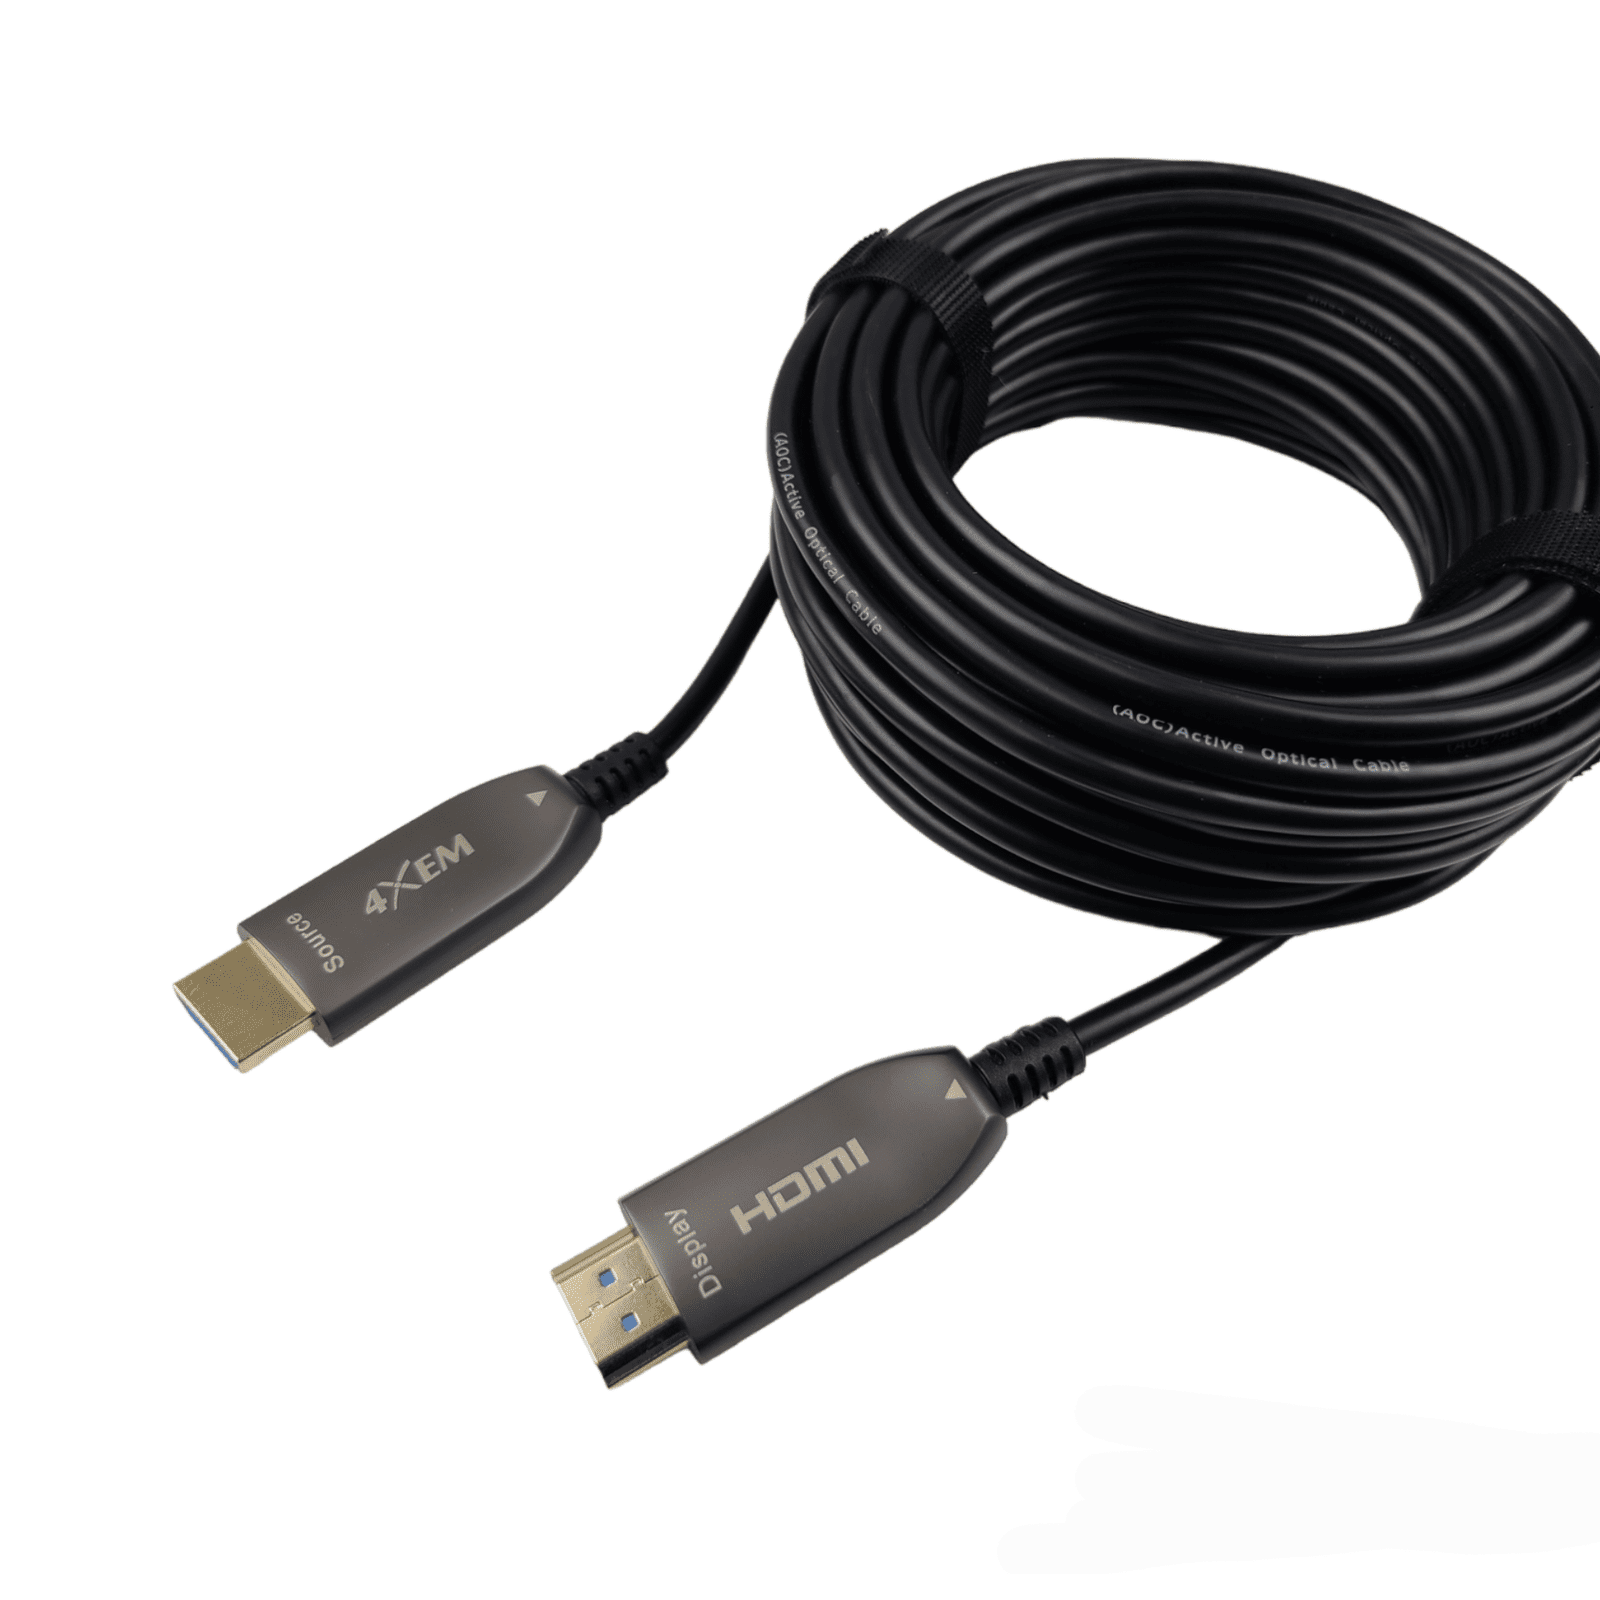 Fosmon 4K HDMI Cable 15FT/4.5M, HDMI 2.0 Cable 4K@60Hz/2160p Support  18Gbps, HDCP, 3D, ARC, Dolby TrueHD, 30AWG Compatible with UHD TV, PC  Monitor